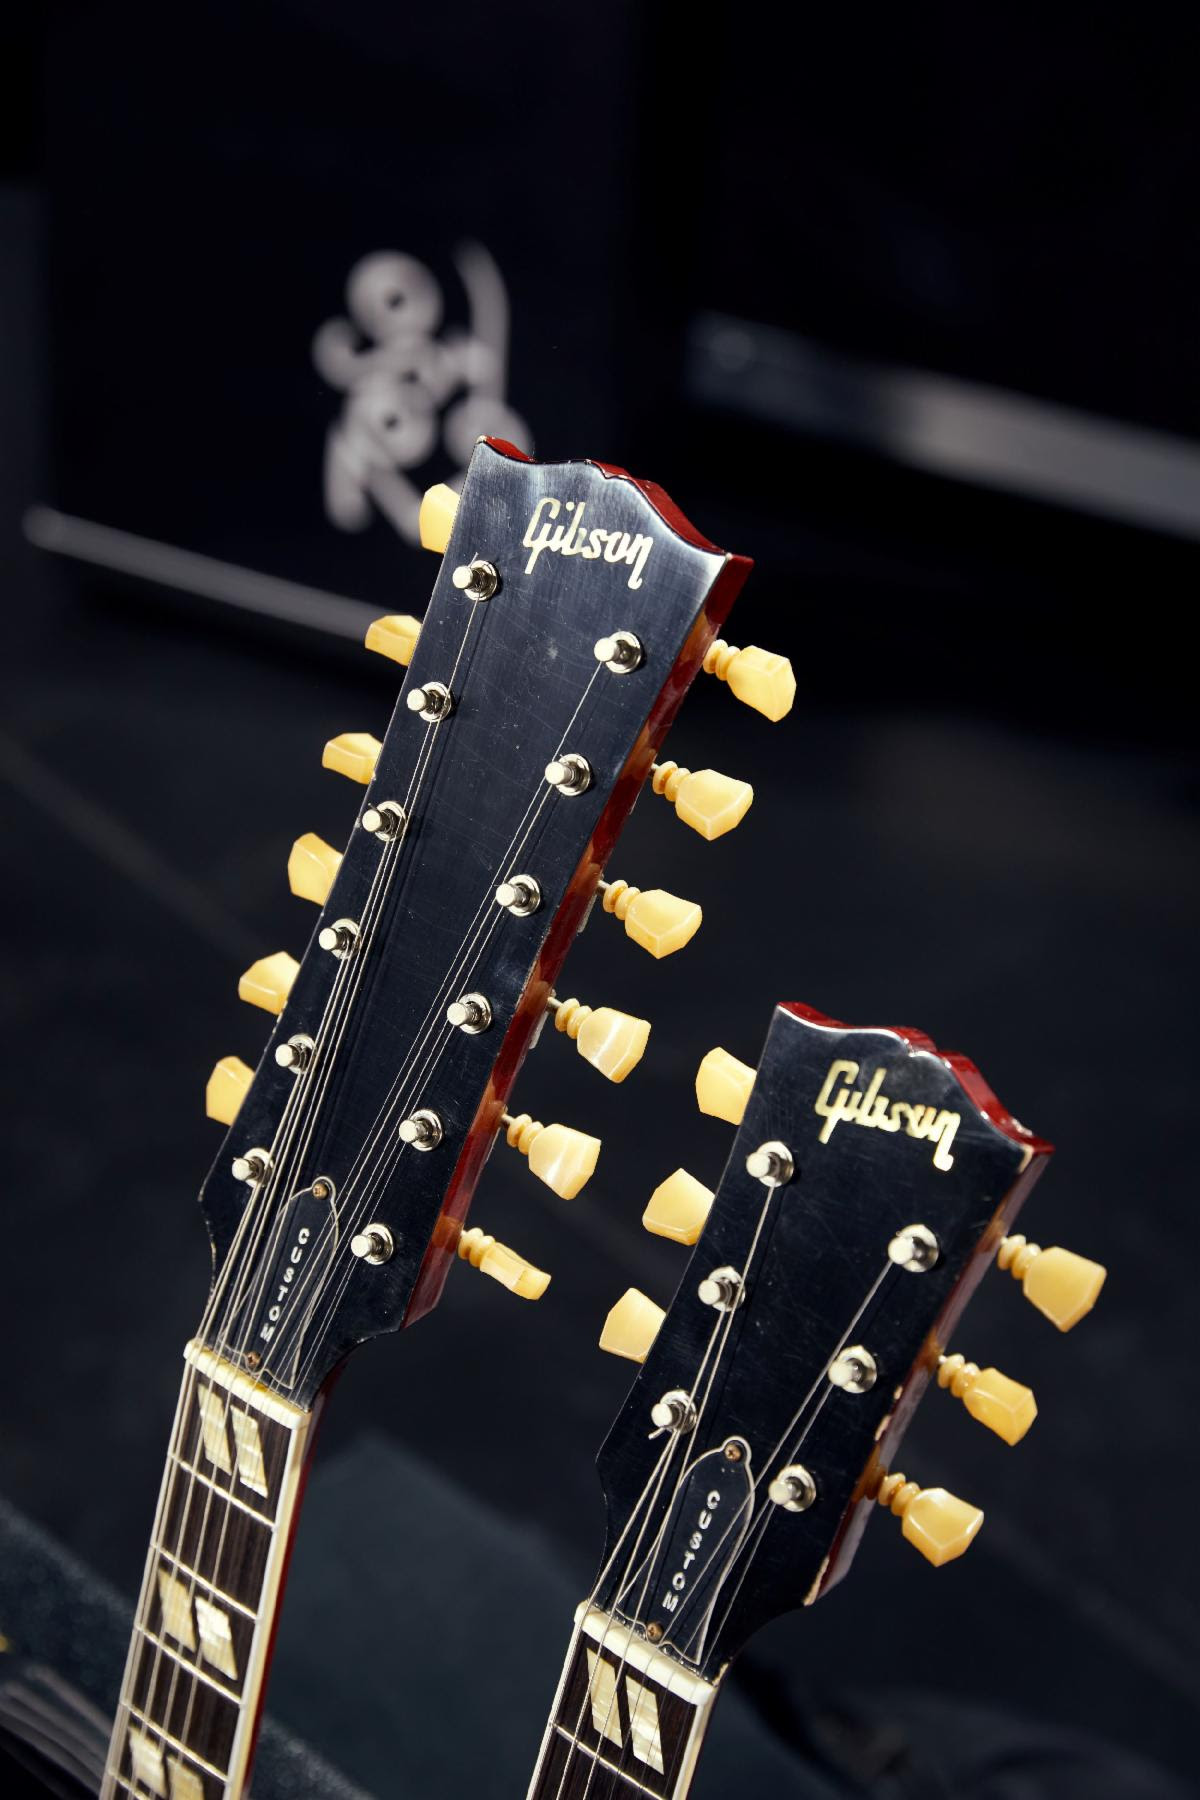 Above: close up of the front headstocks for the Jimmy Page 1969 EDS-1275 Doubleneck Collector’s Edition from Gibson Custom.